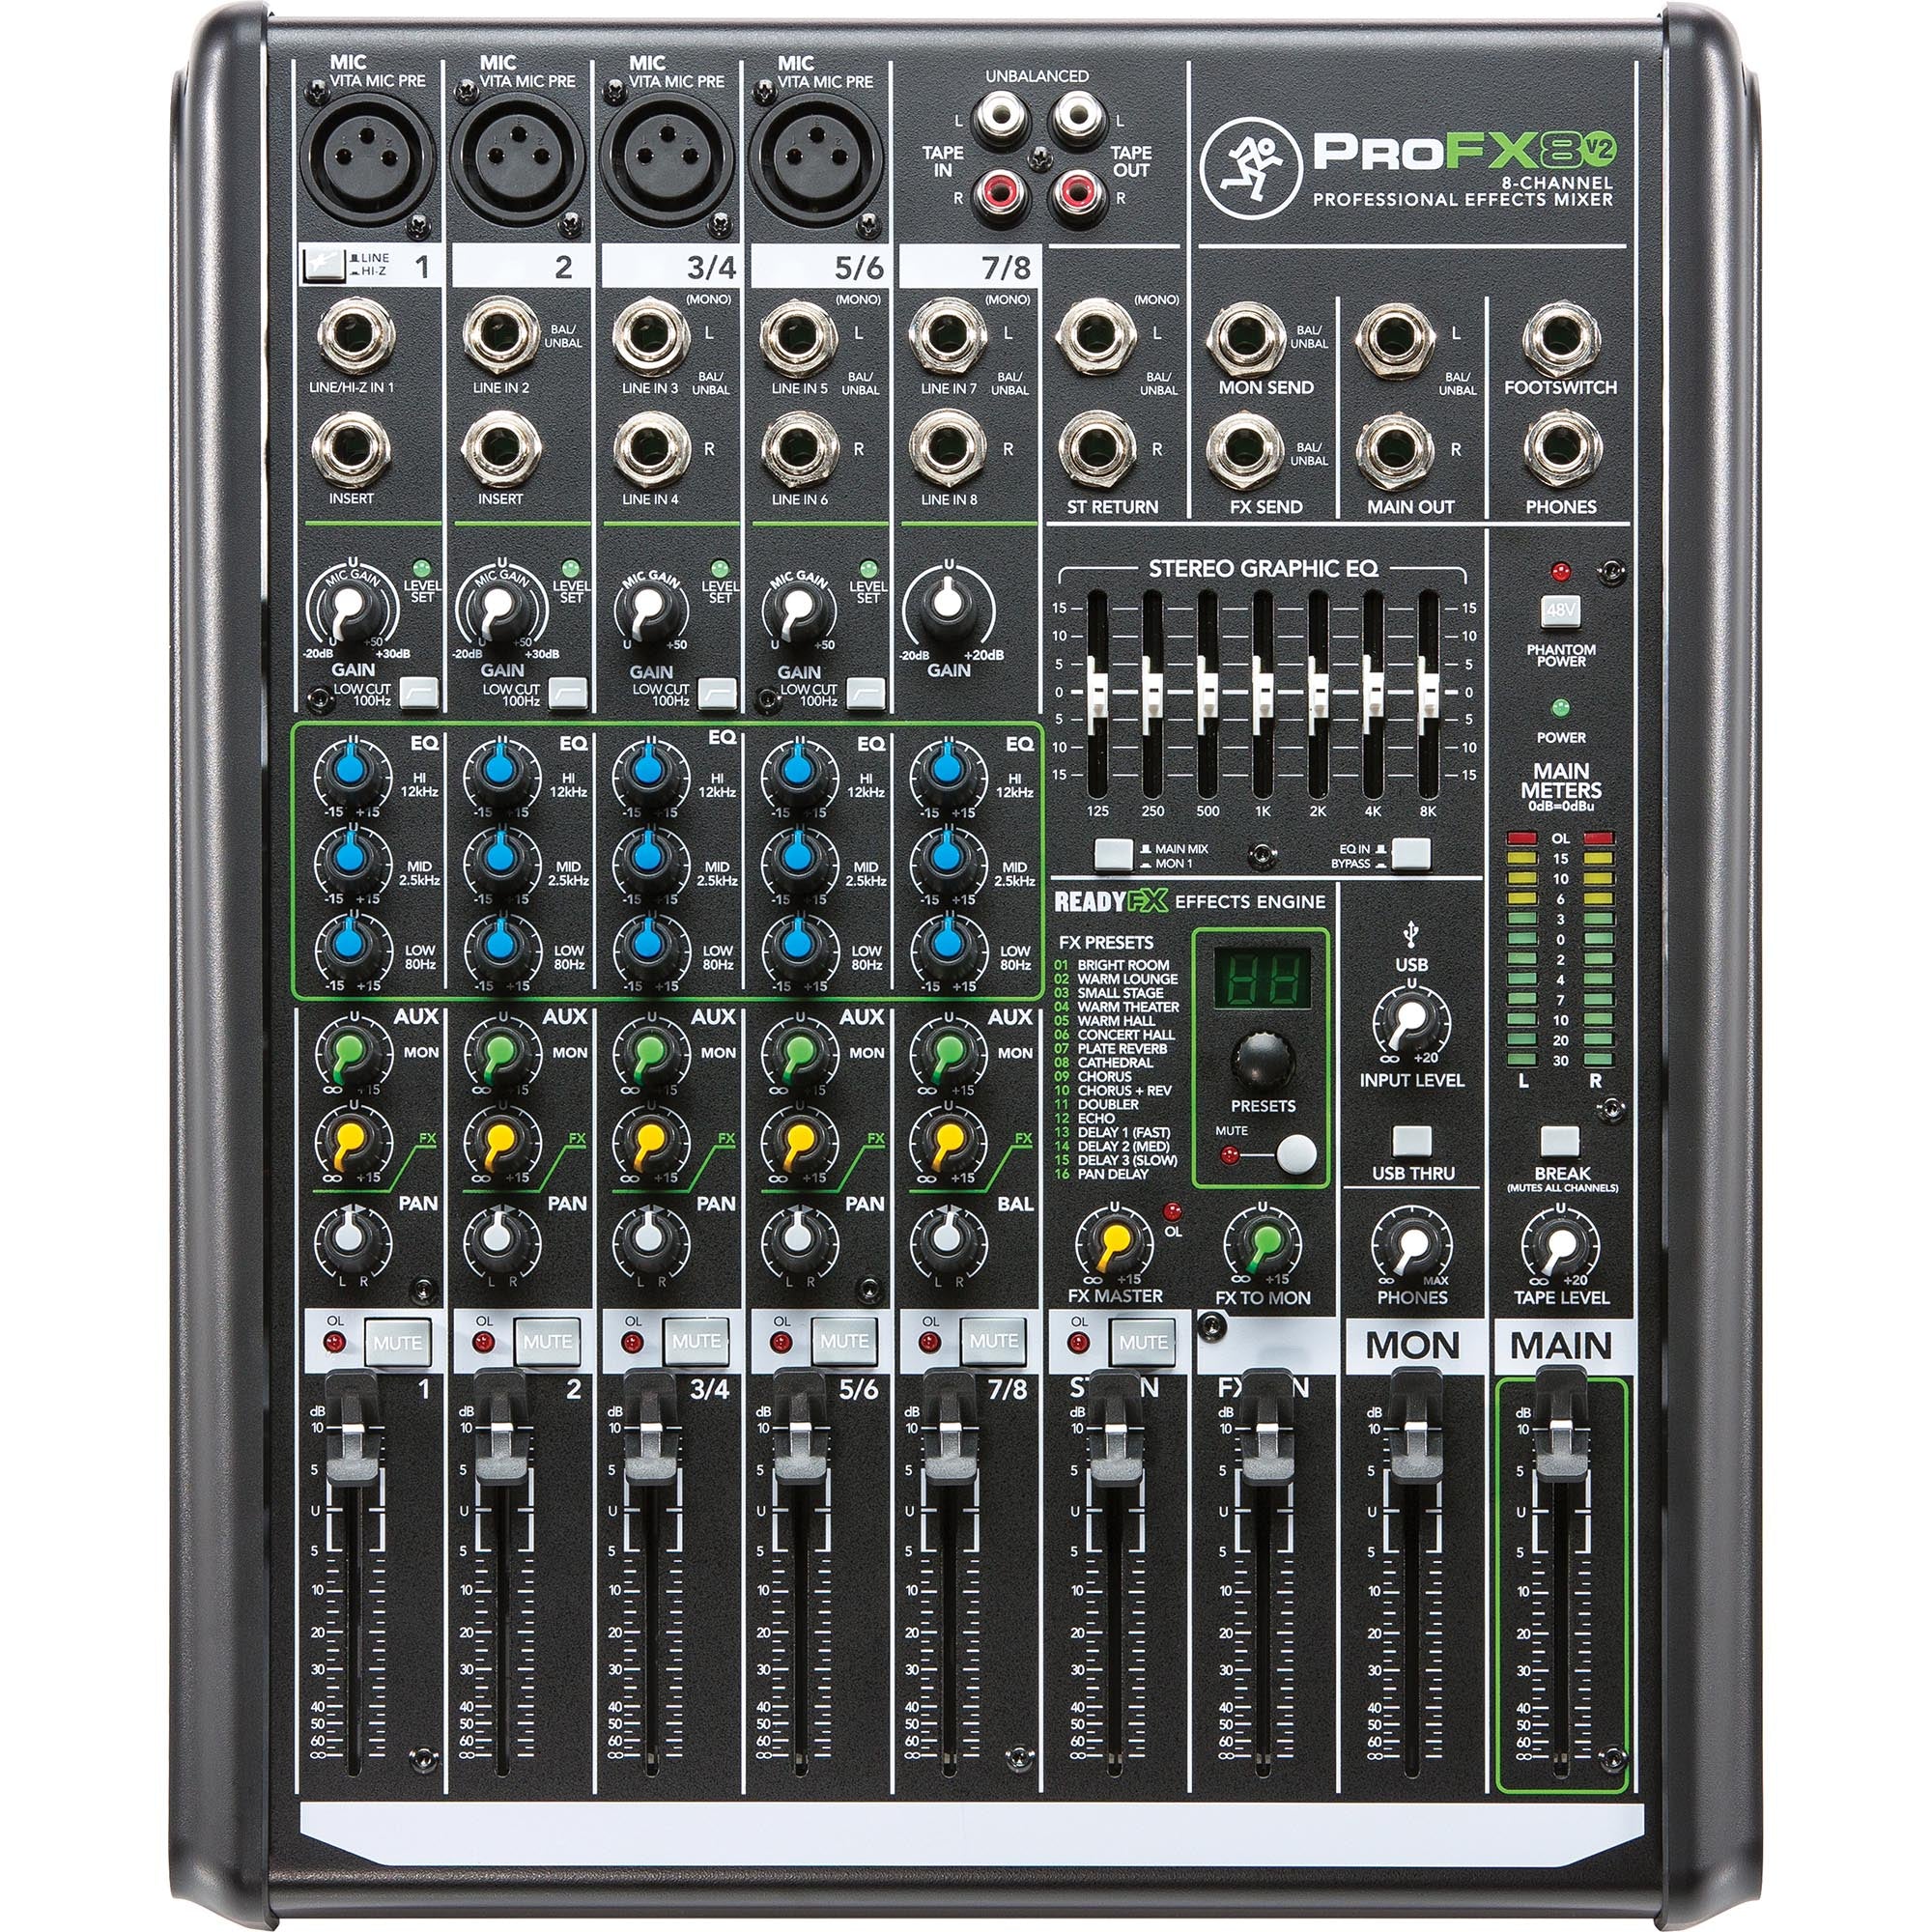 8-Channel Compact Mixer With USB And Built-In Effects